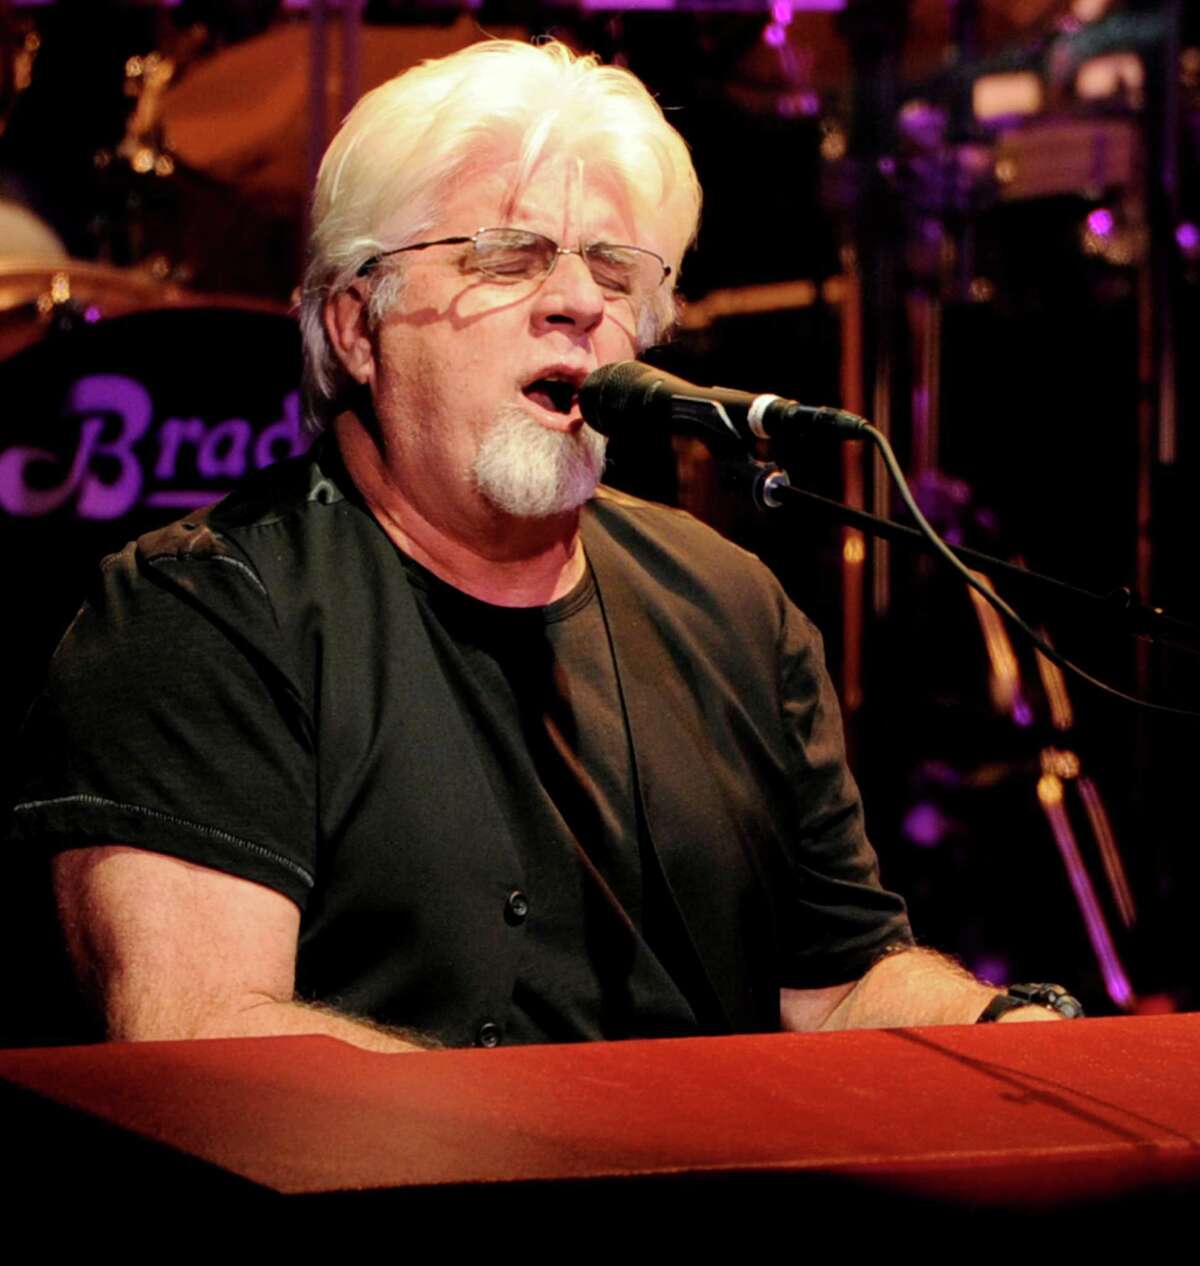 Michael McDonald of The Dukes of September Rhythm Revue performs at the Gibson Amphitheatre on June 28, 2012 in Universal City, California.